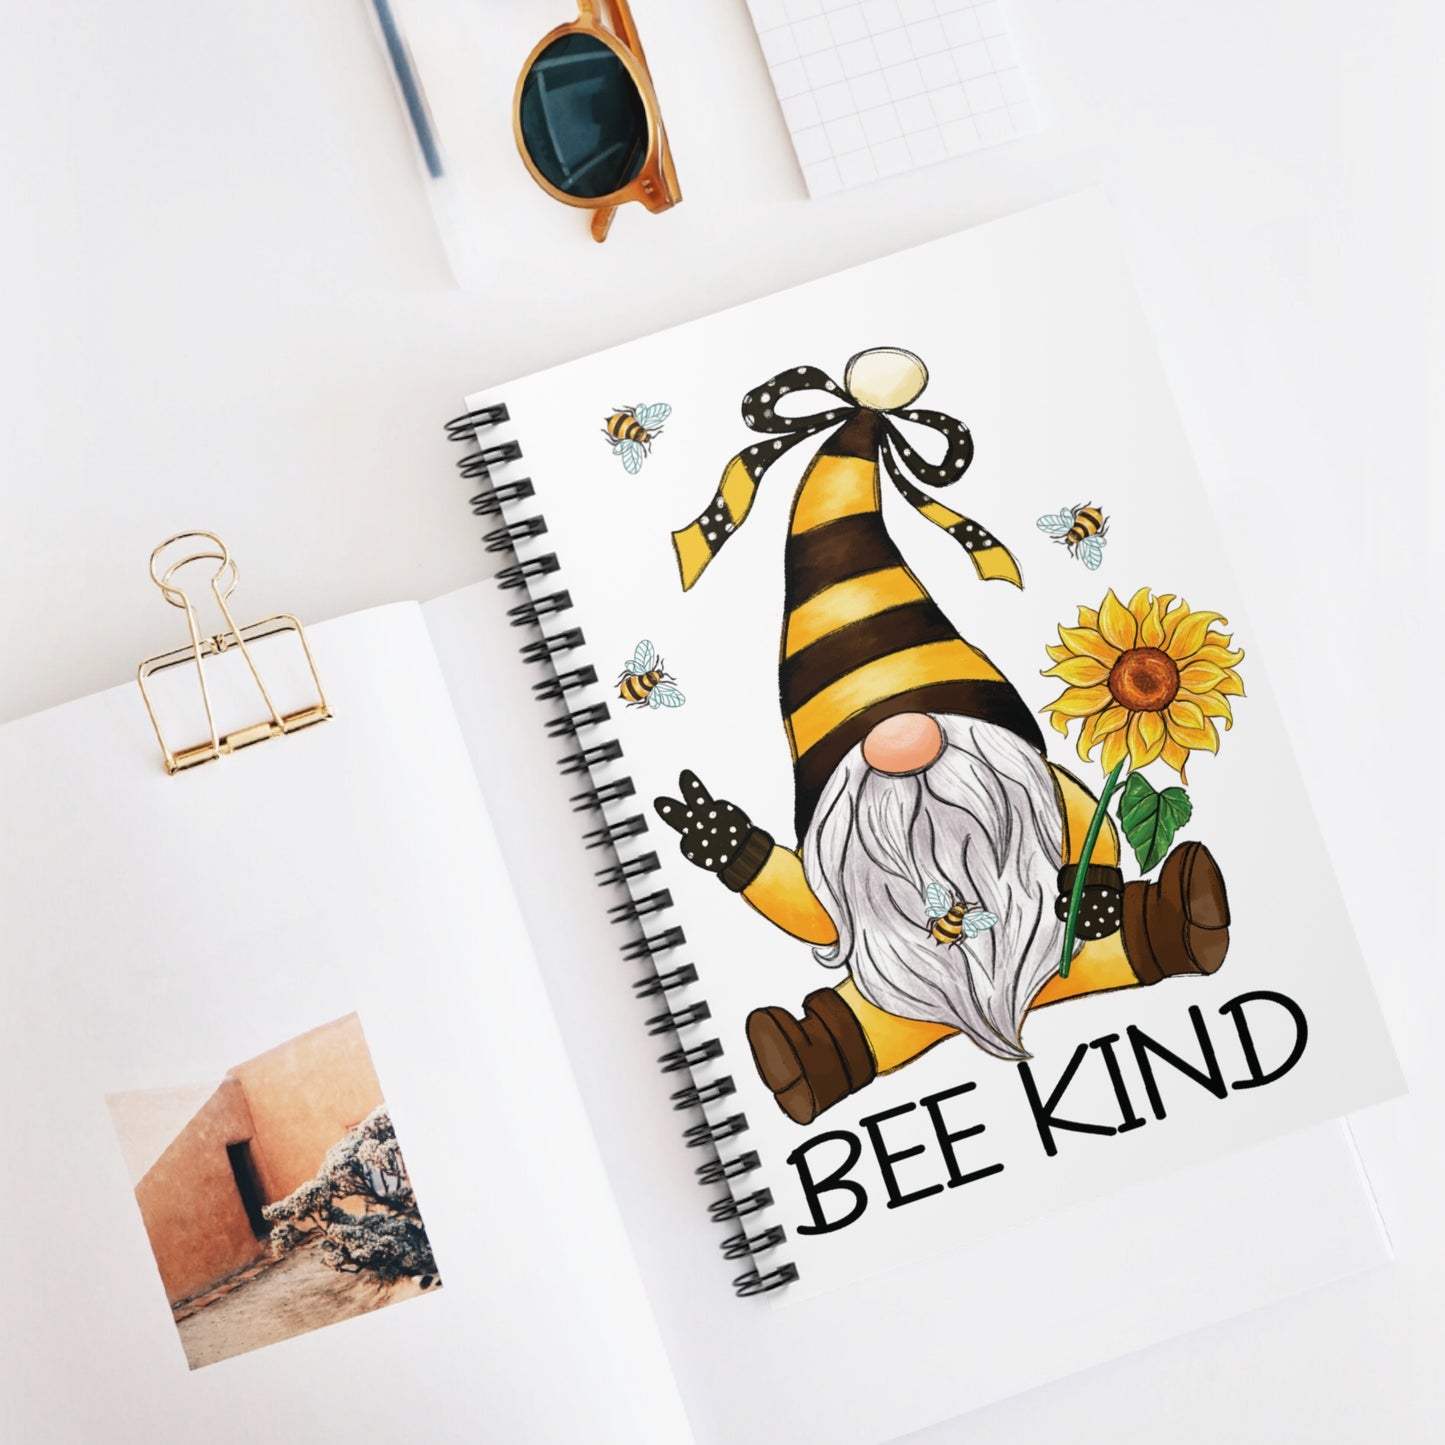 Bee Kind: Spiral Notebook - Log Books - Journals - Diaries - and More Custom Printed by TheGlassyLass